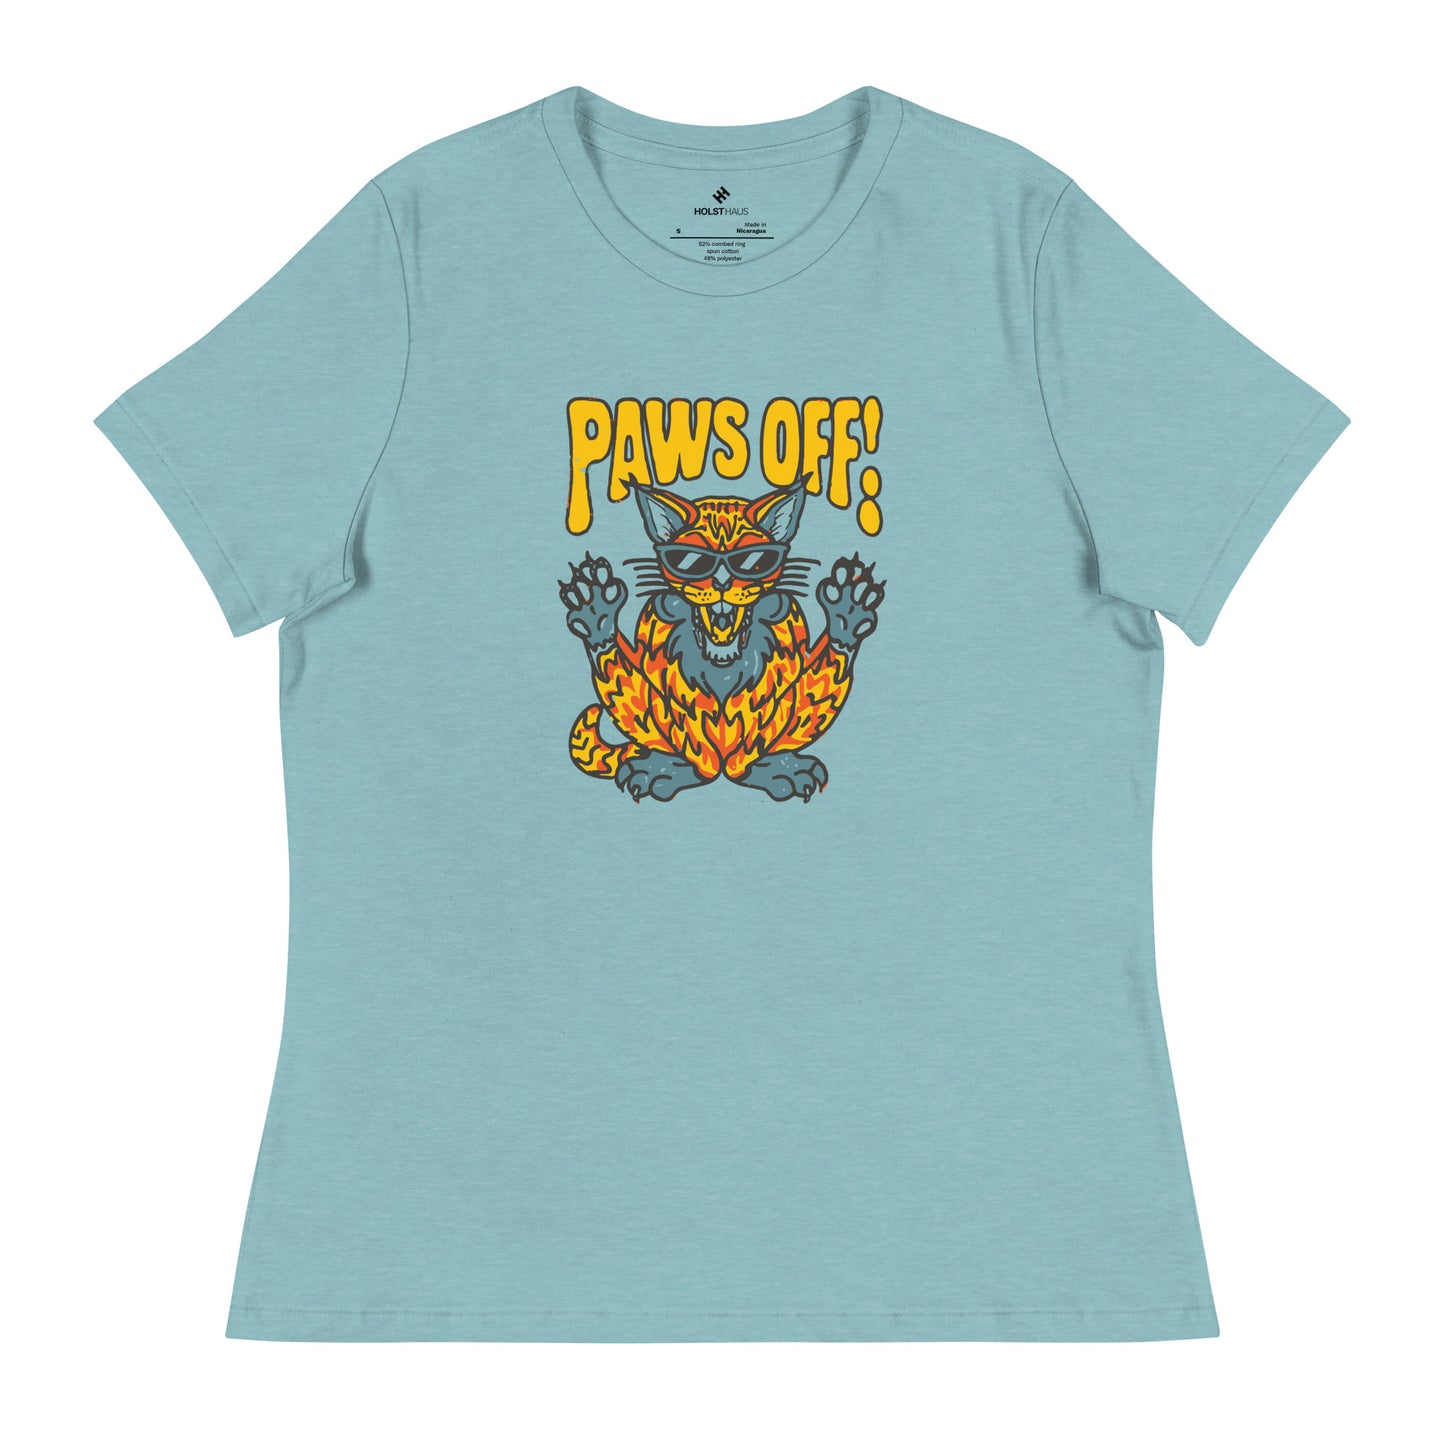 Cattitude with Comfort: Soft "Paws Off" Graphic Tee, Everyday or Dressed Up